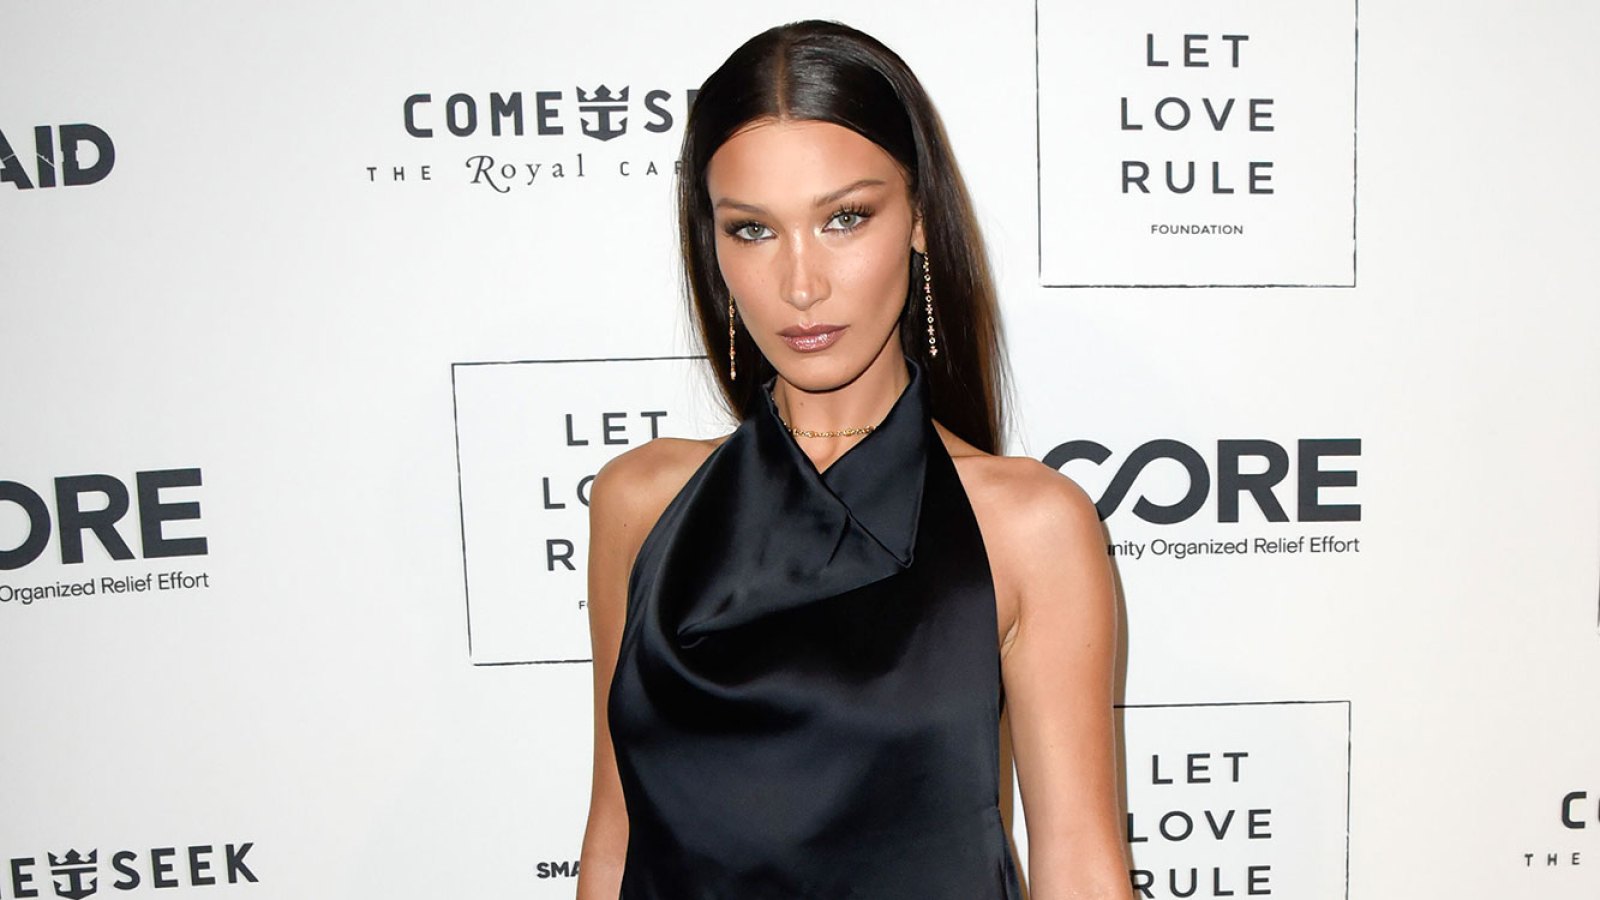 Bella Hadid Opens Up About Being Abused and Losing Boundaries in Past Relationships Core x Let Love Rule